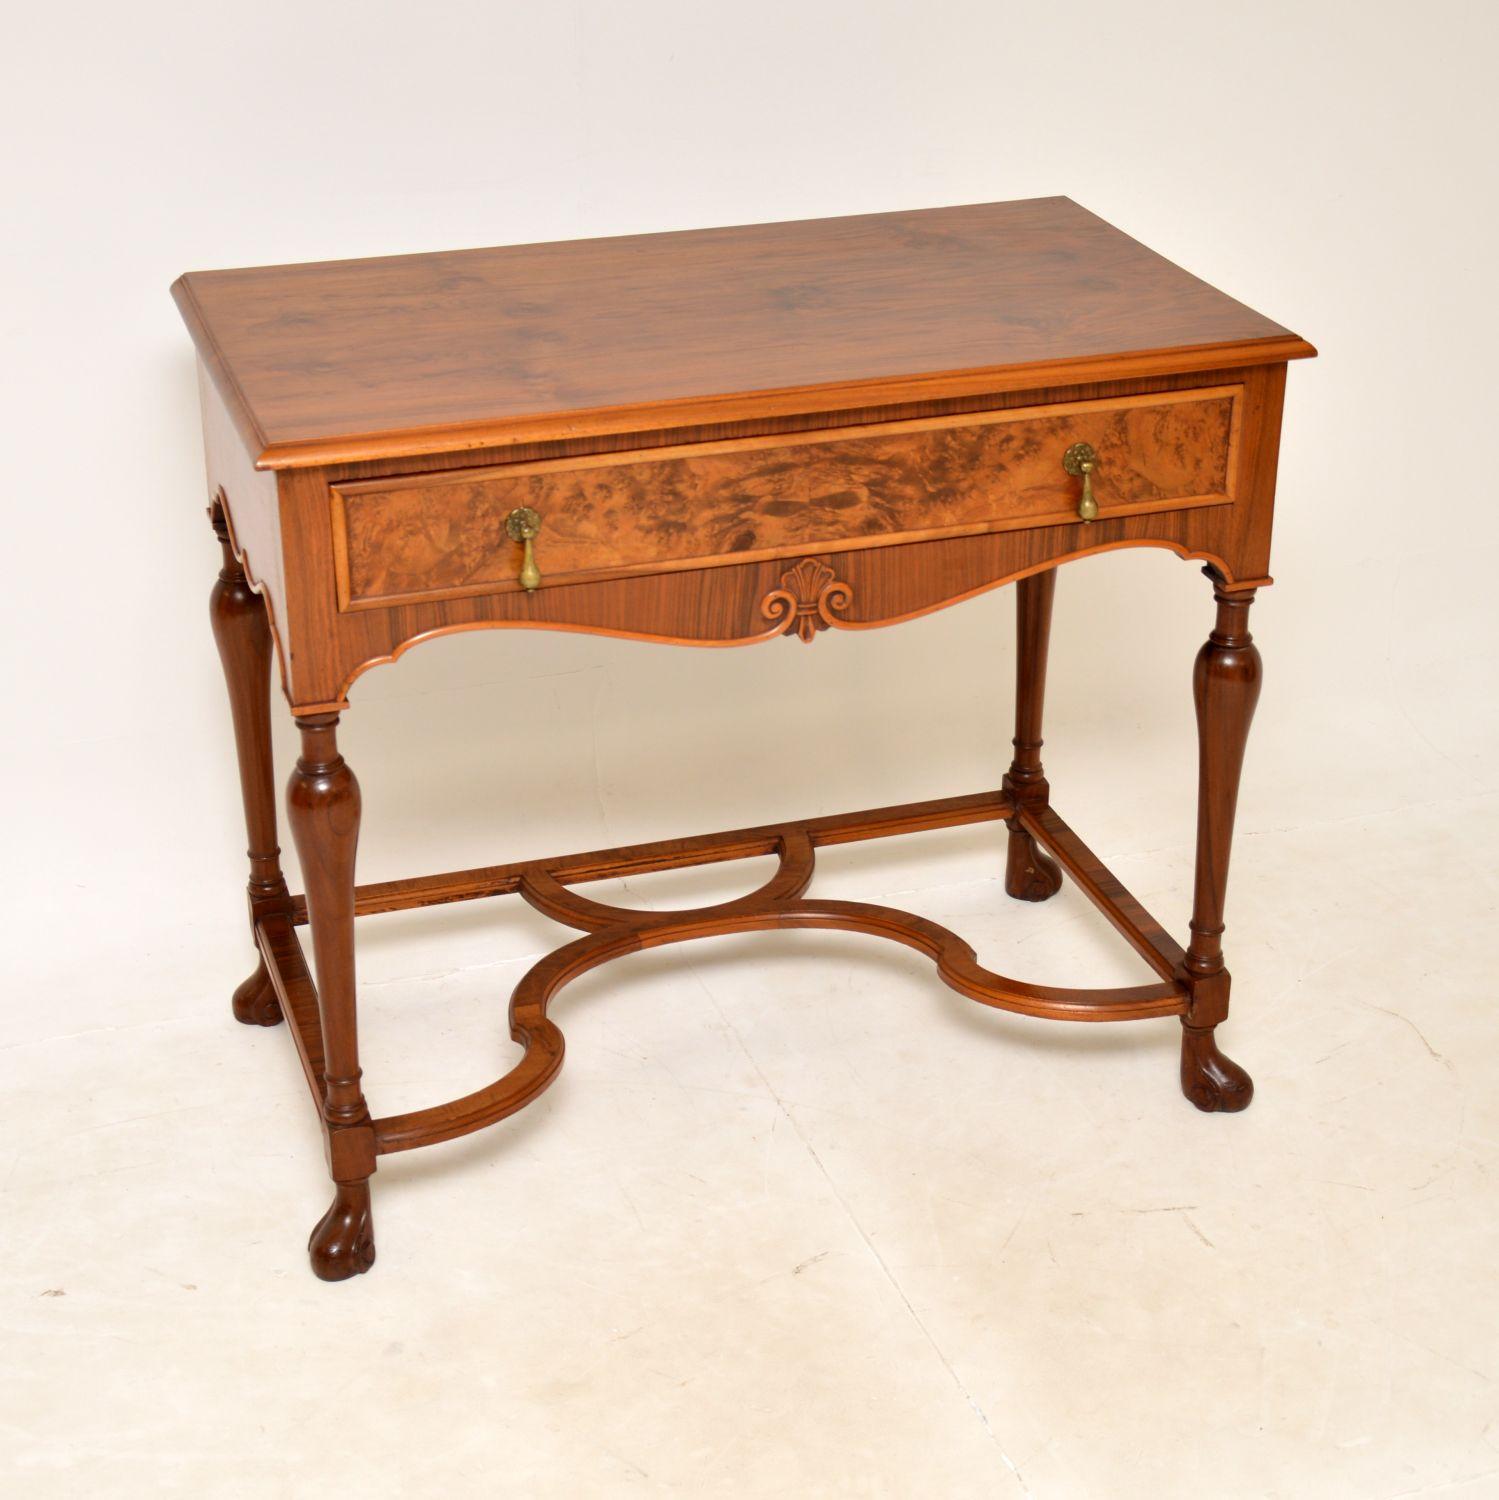 A beautiful and impressive antique console / side table in walnut. This was made in England, it dates from around the 1930’s period.

It is of superb quality, with a stunning burr walnut drawer front and lovely figured walnut top and sides. The